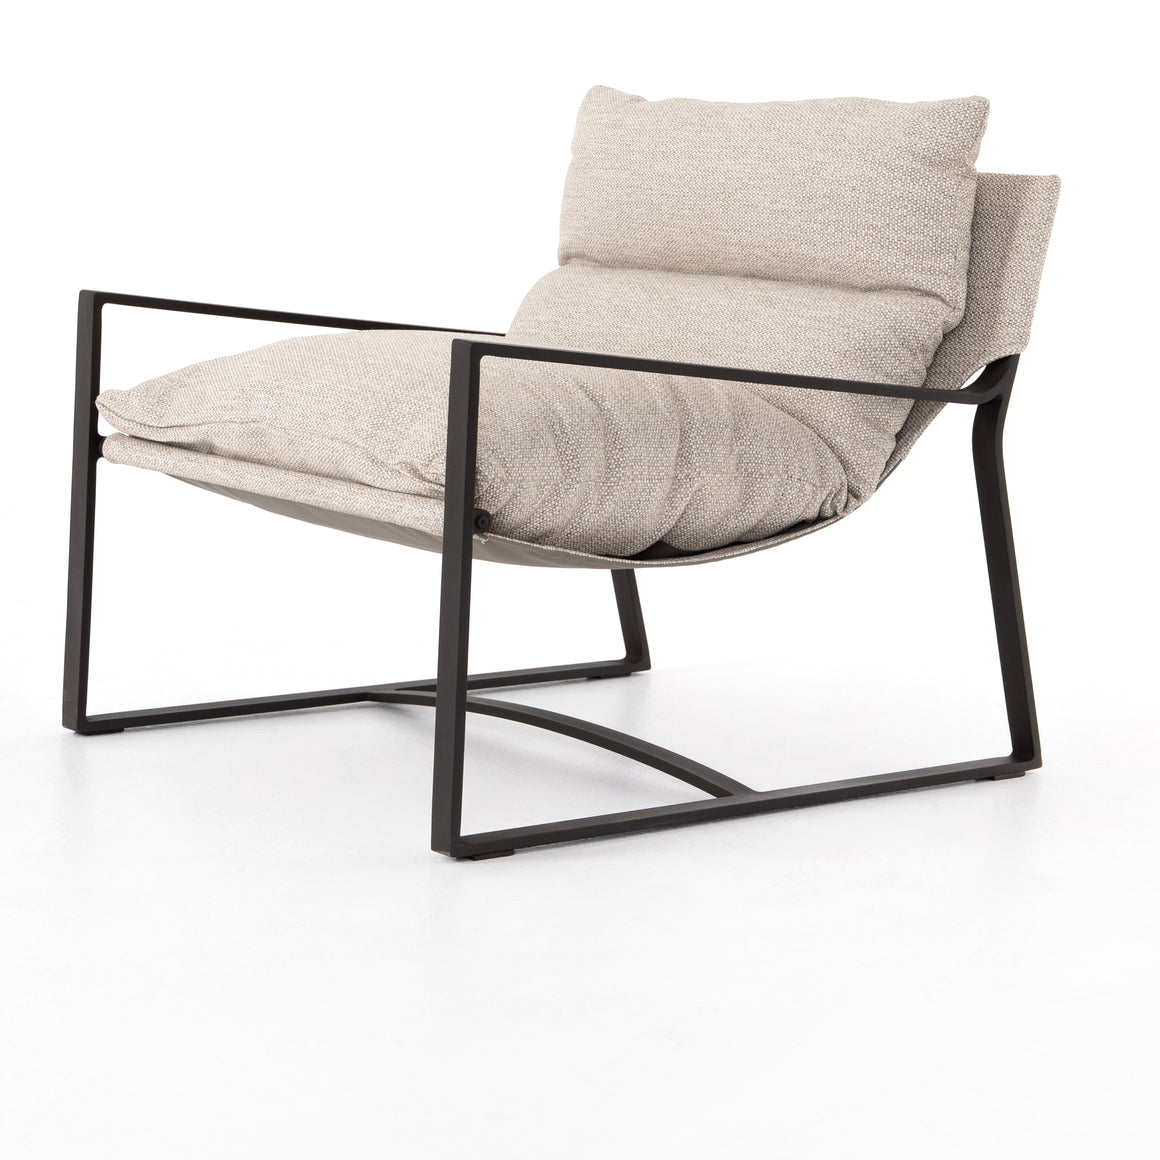 AVON OUTDOOR SLING CHAIR-SAND